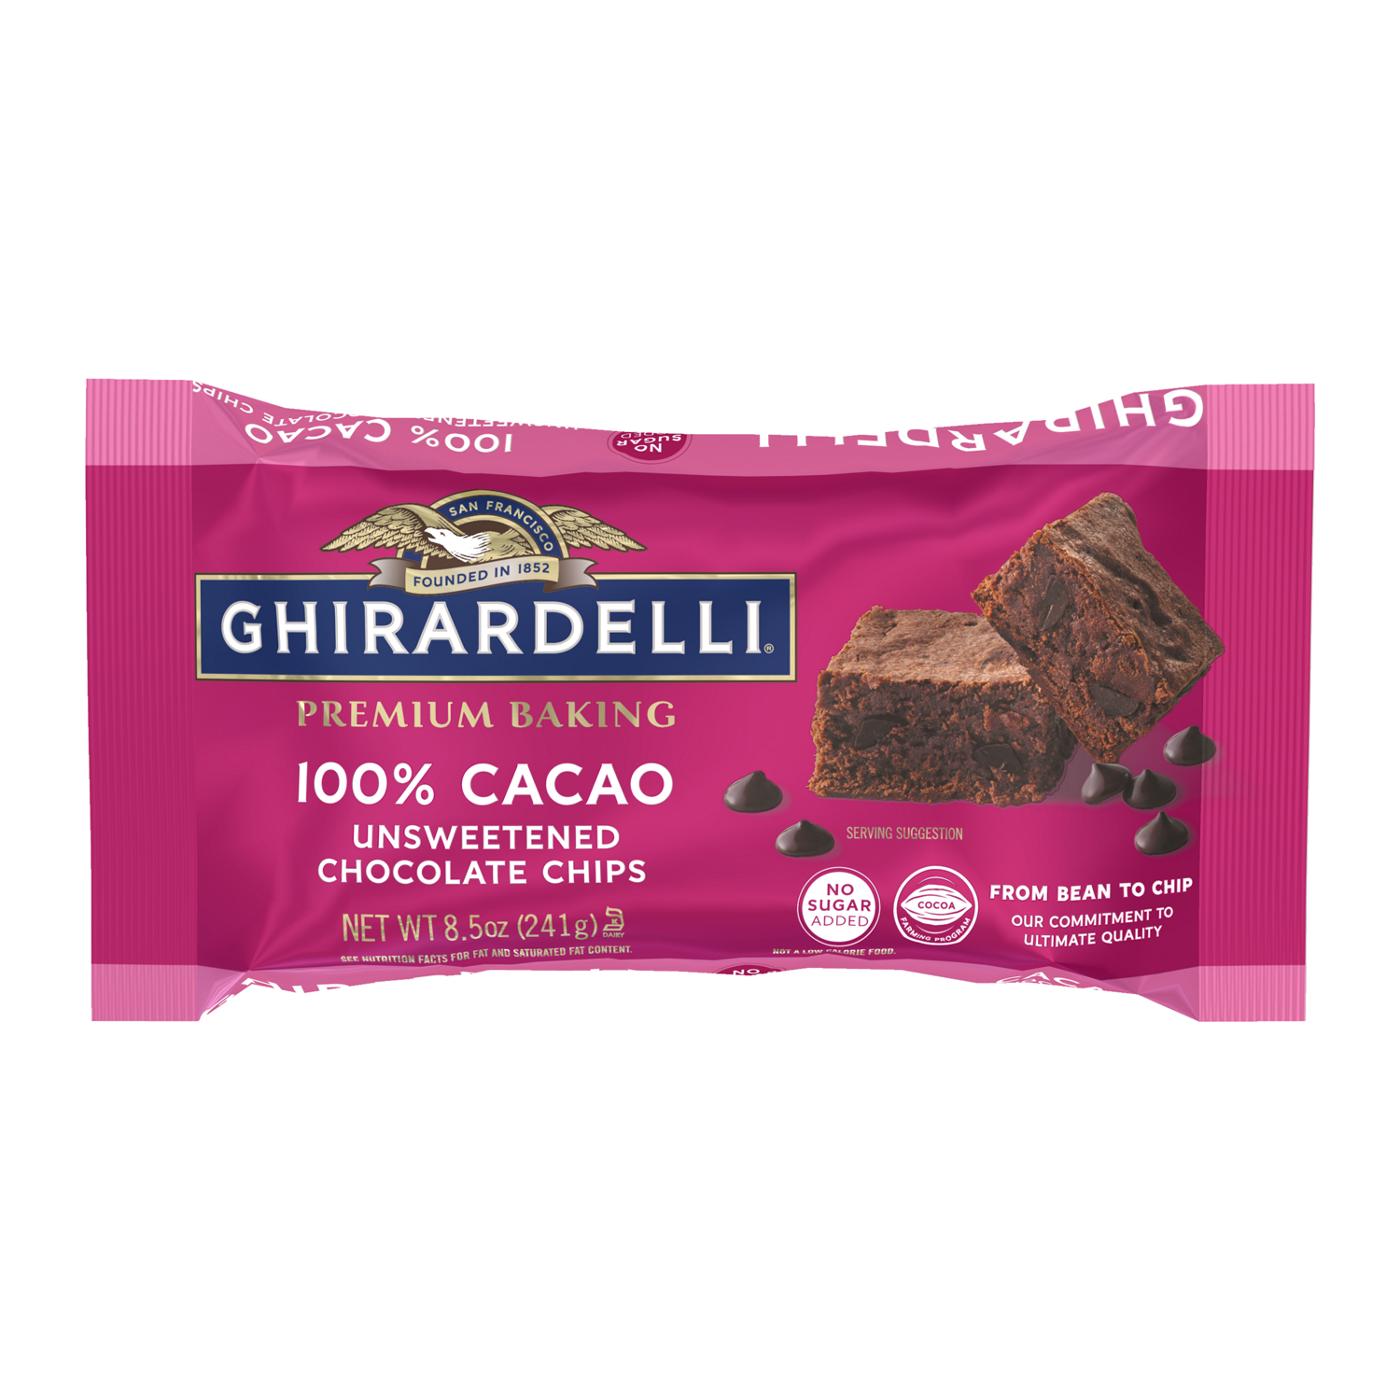 Ghirardelli 100% Cacao Unsweetened Chocolate Chips for Baking, Premium Baking Chips; image 1 of 7